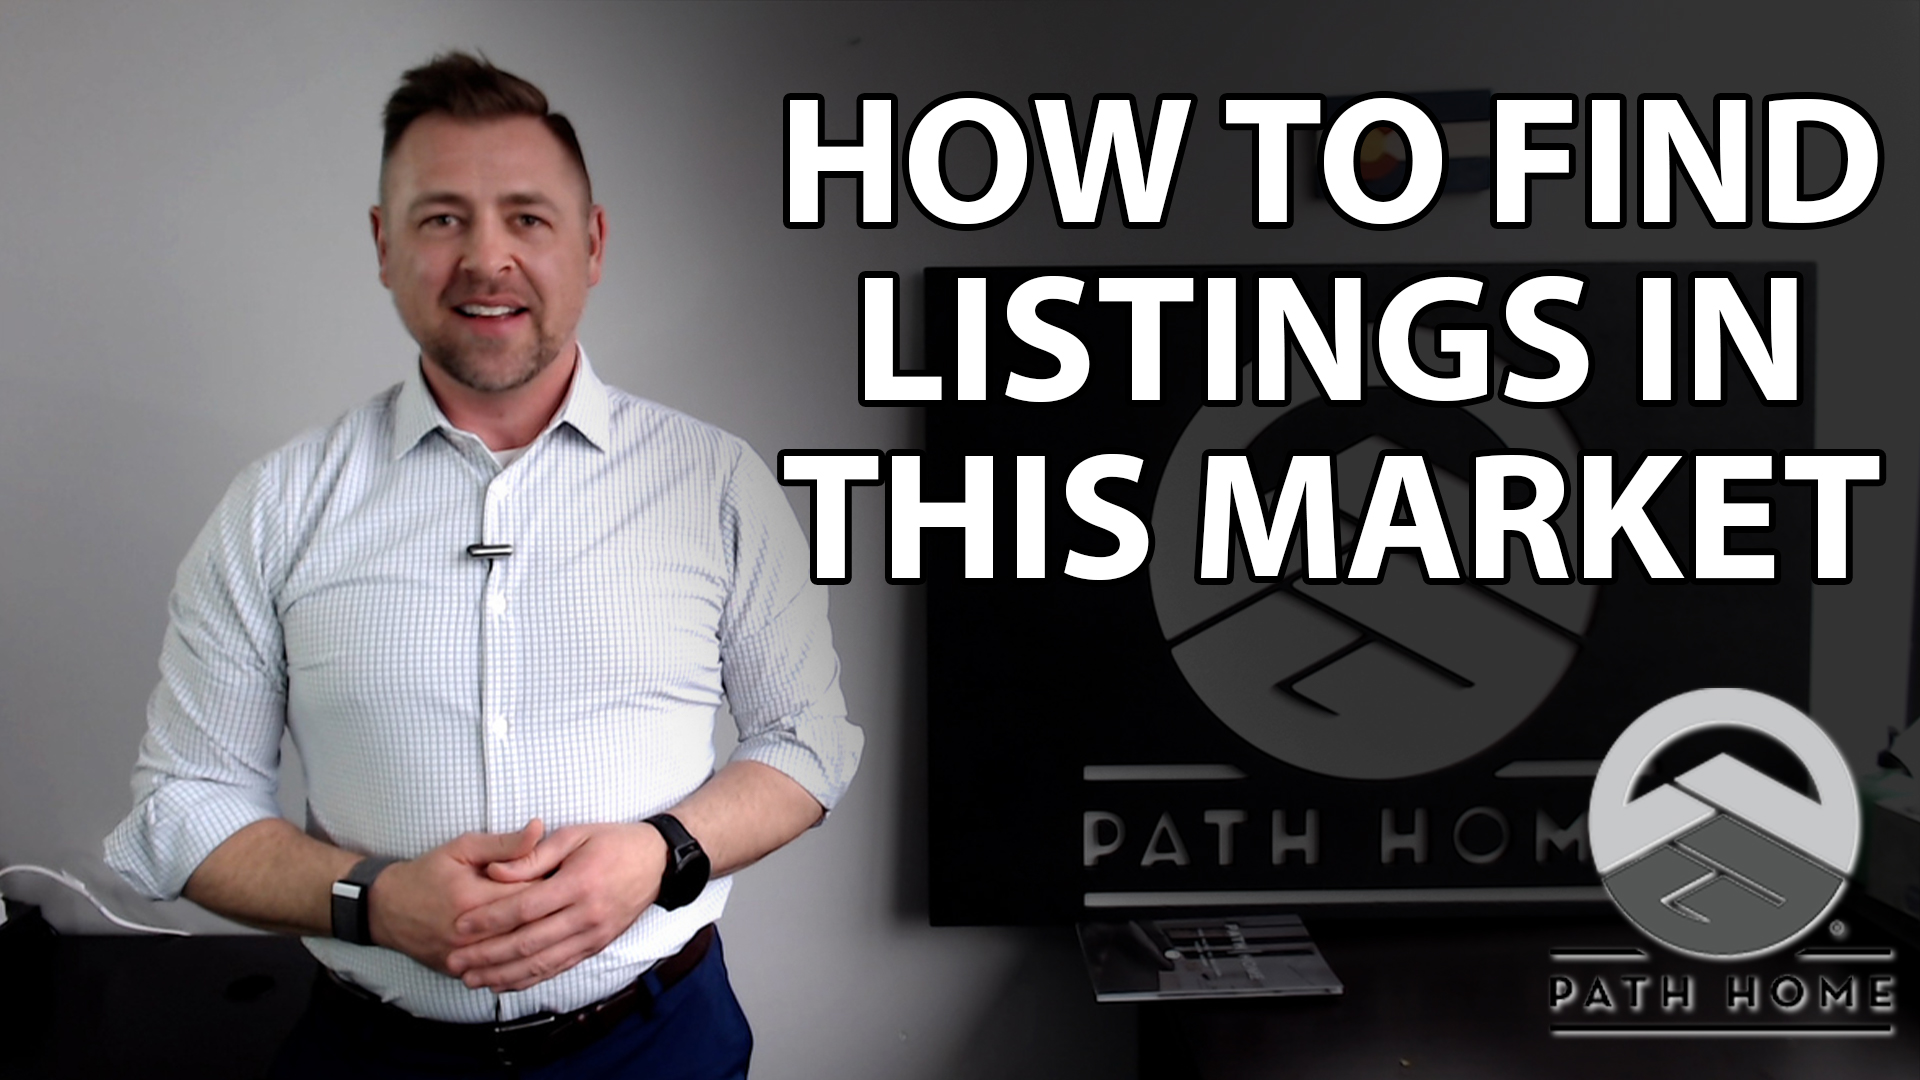 3 Great Ways to Find New Listings in This Market